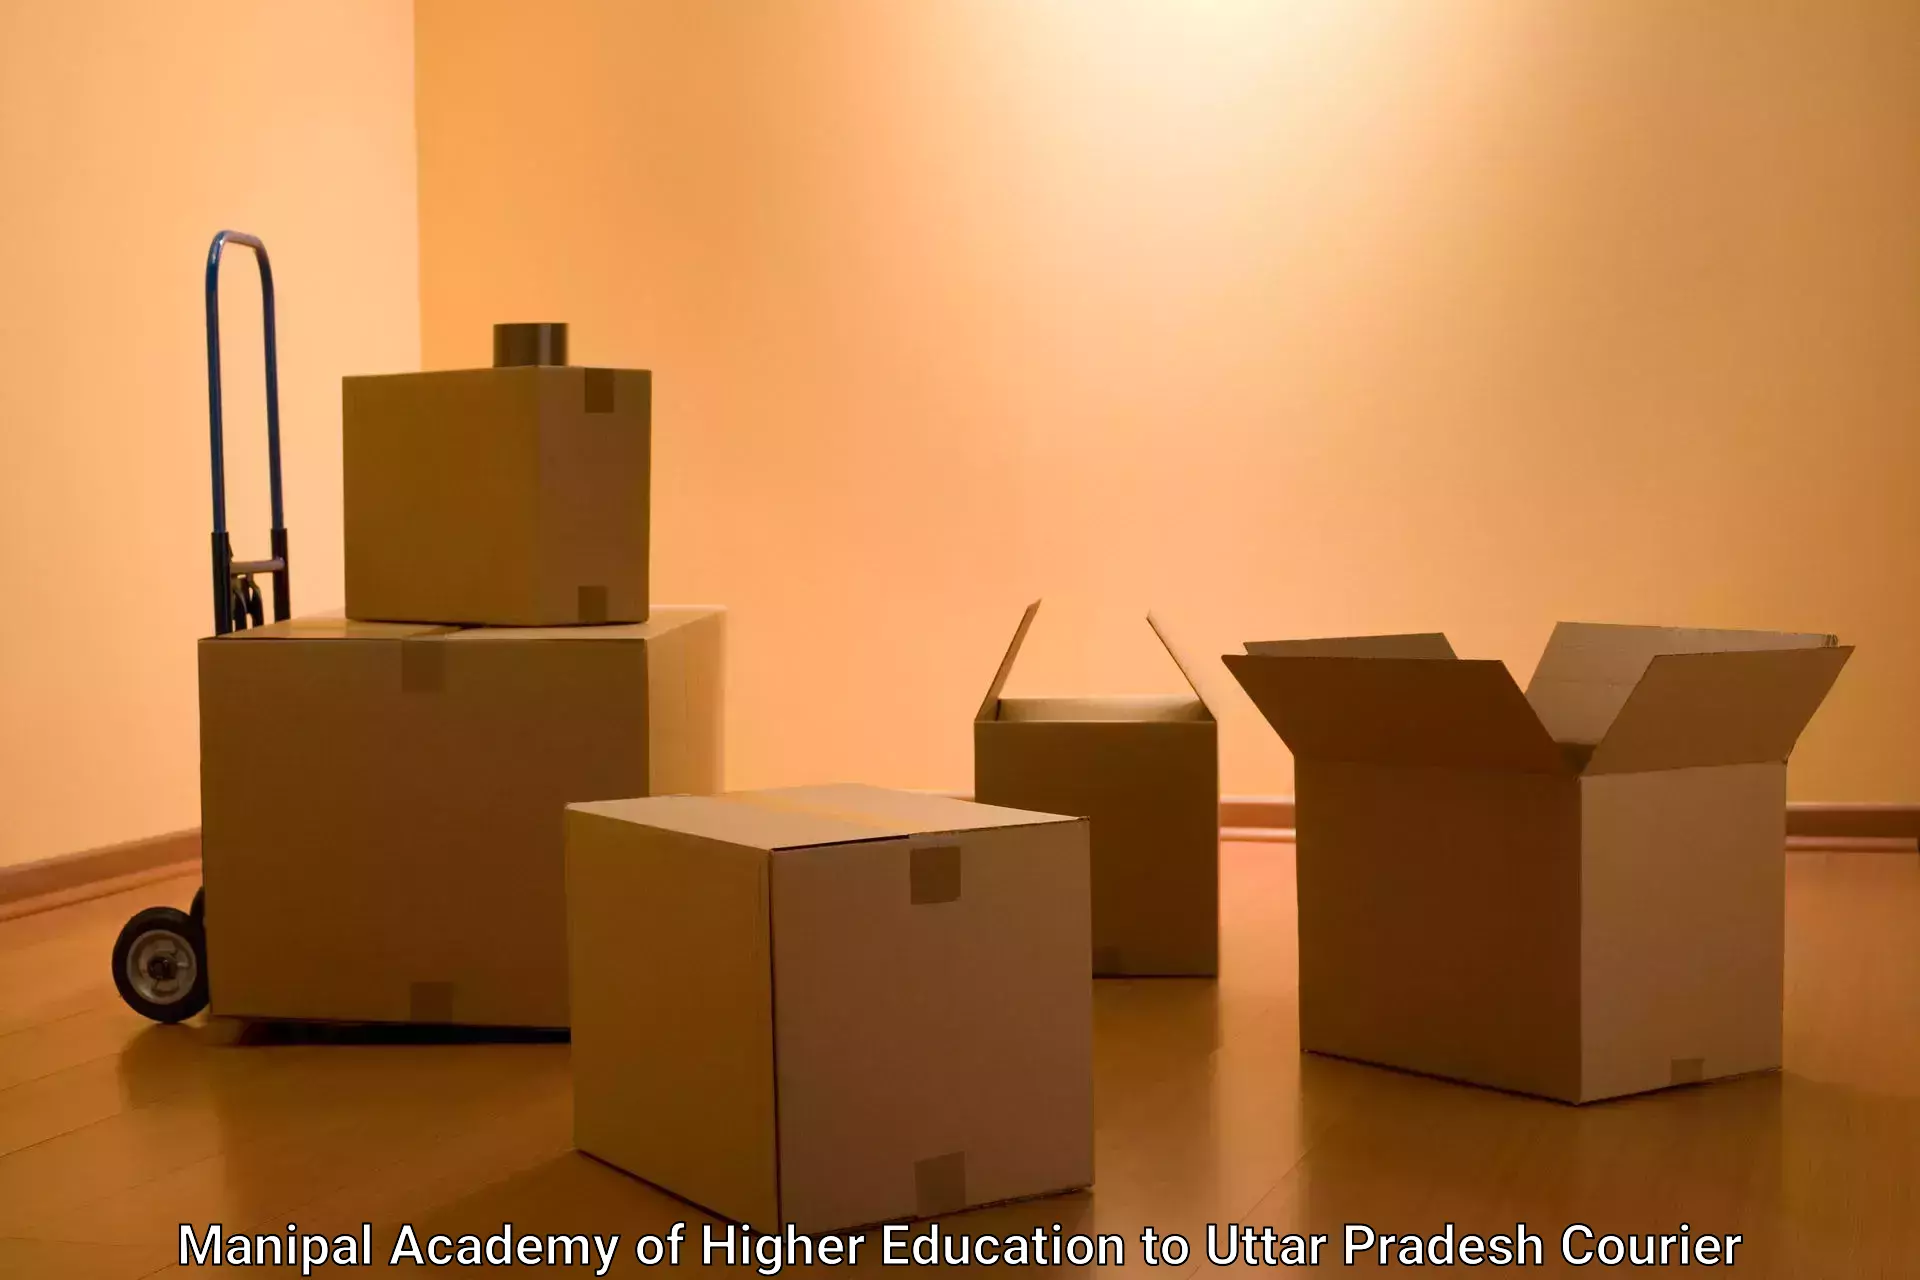 Professional courier handling in Manipal Academy of Higher Education to Allahabad